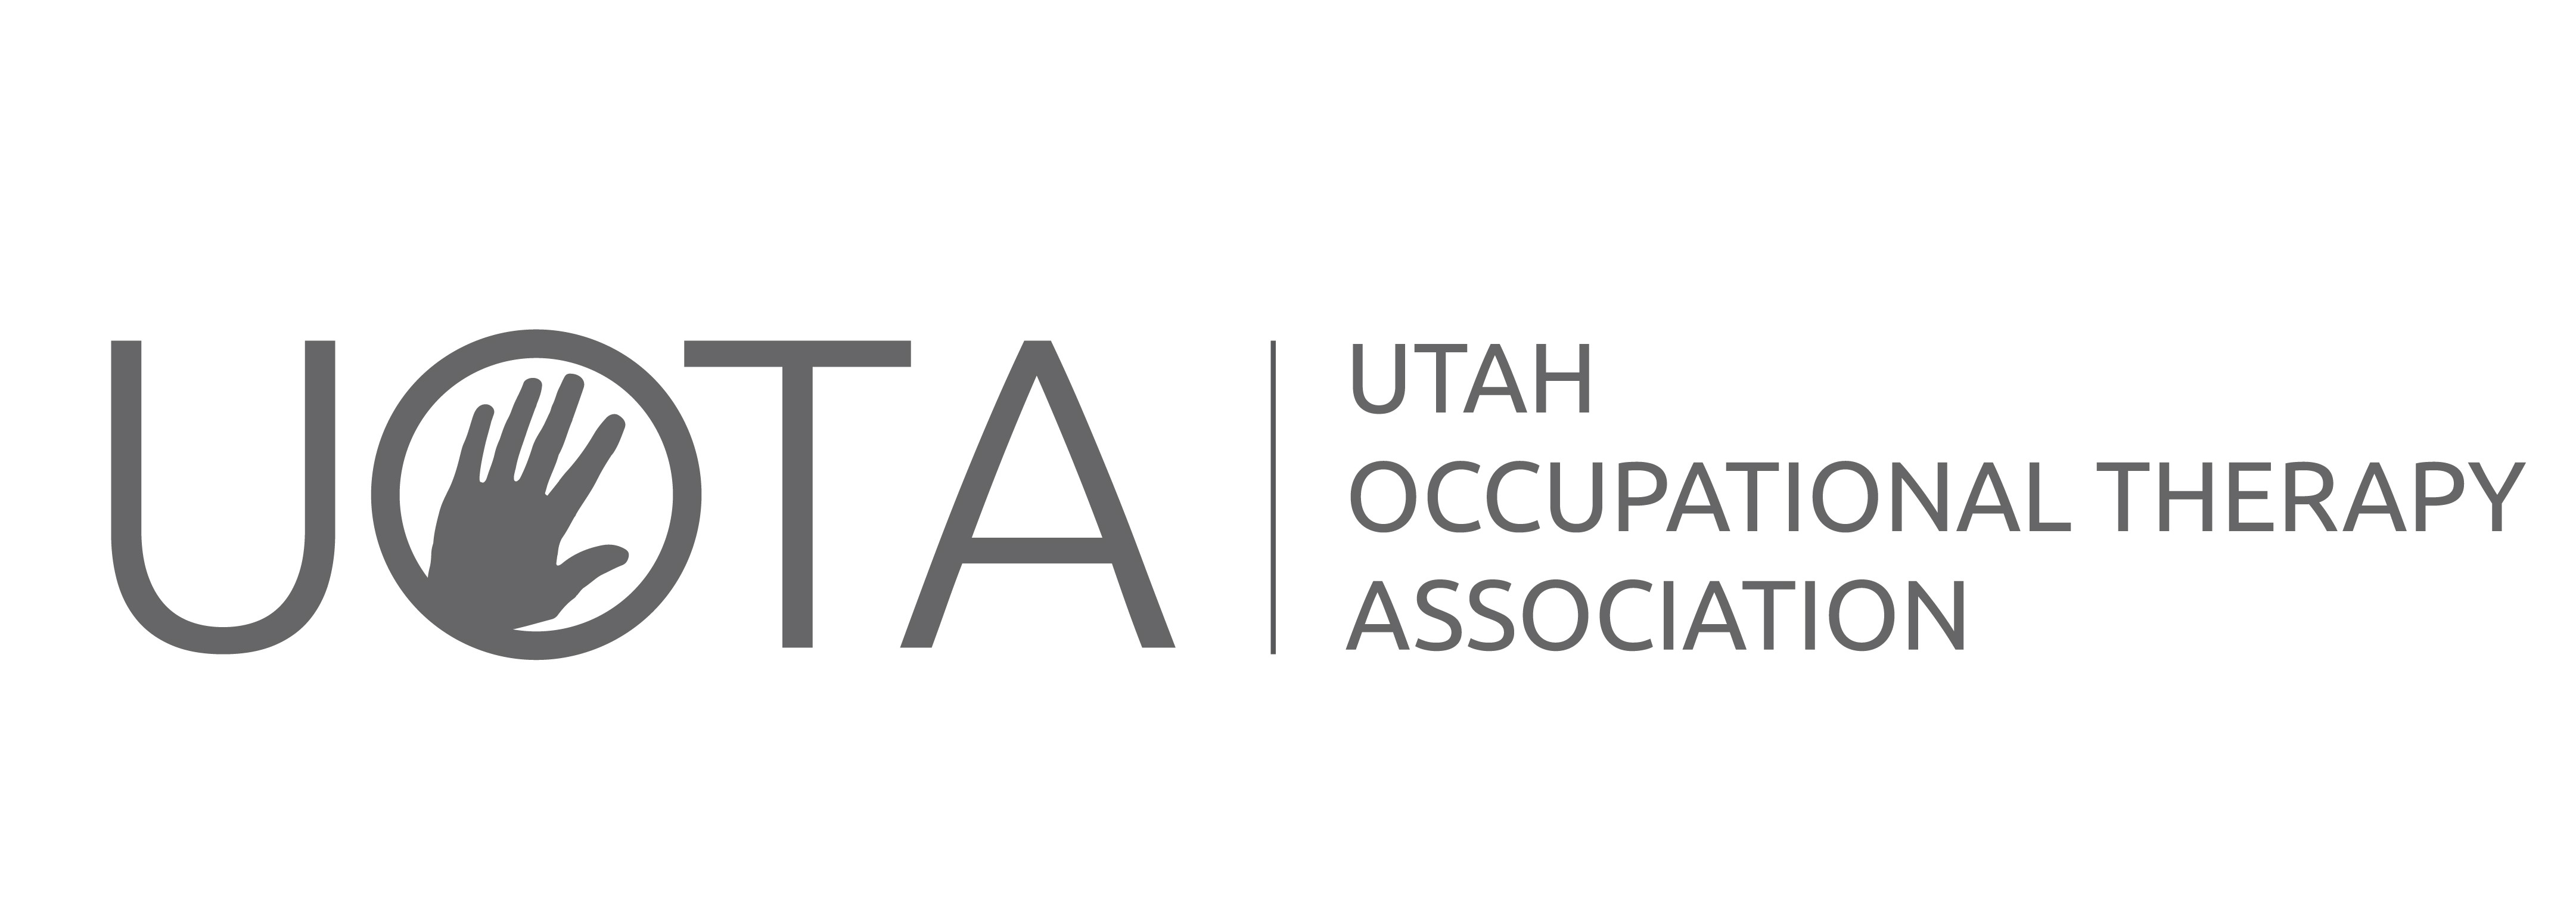 utah occupational therapy 